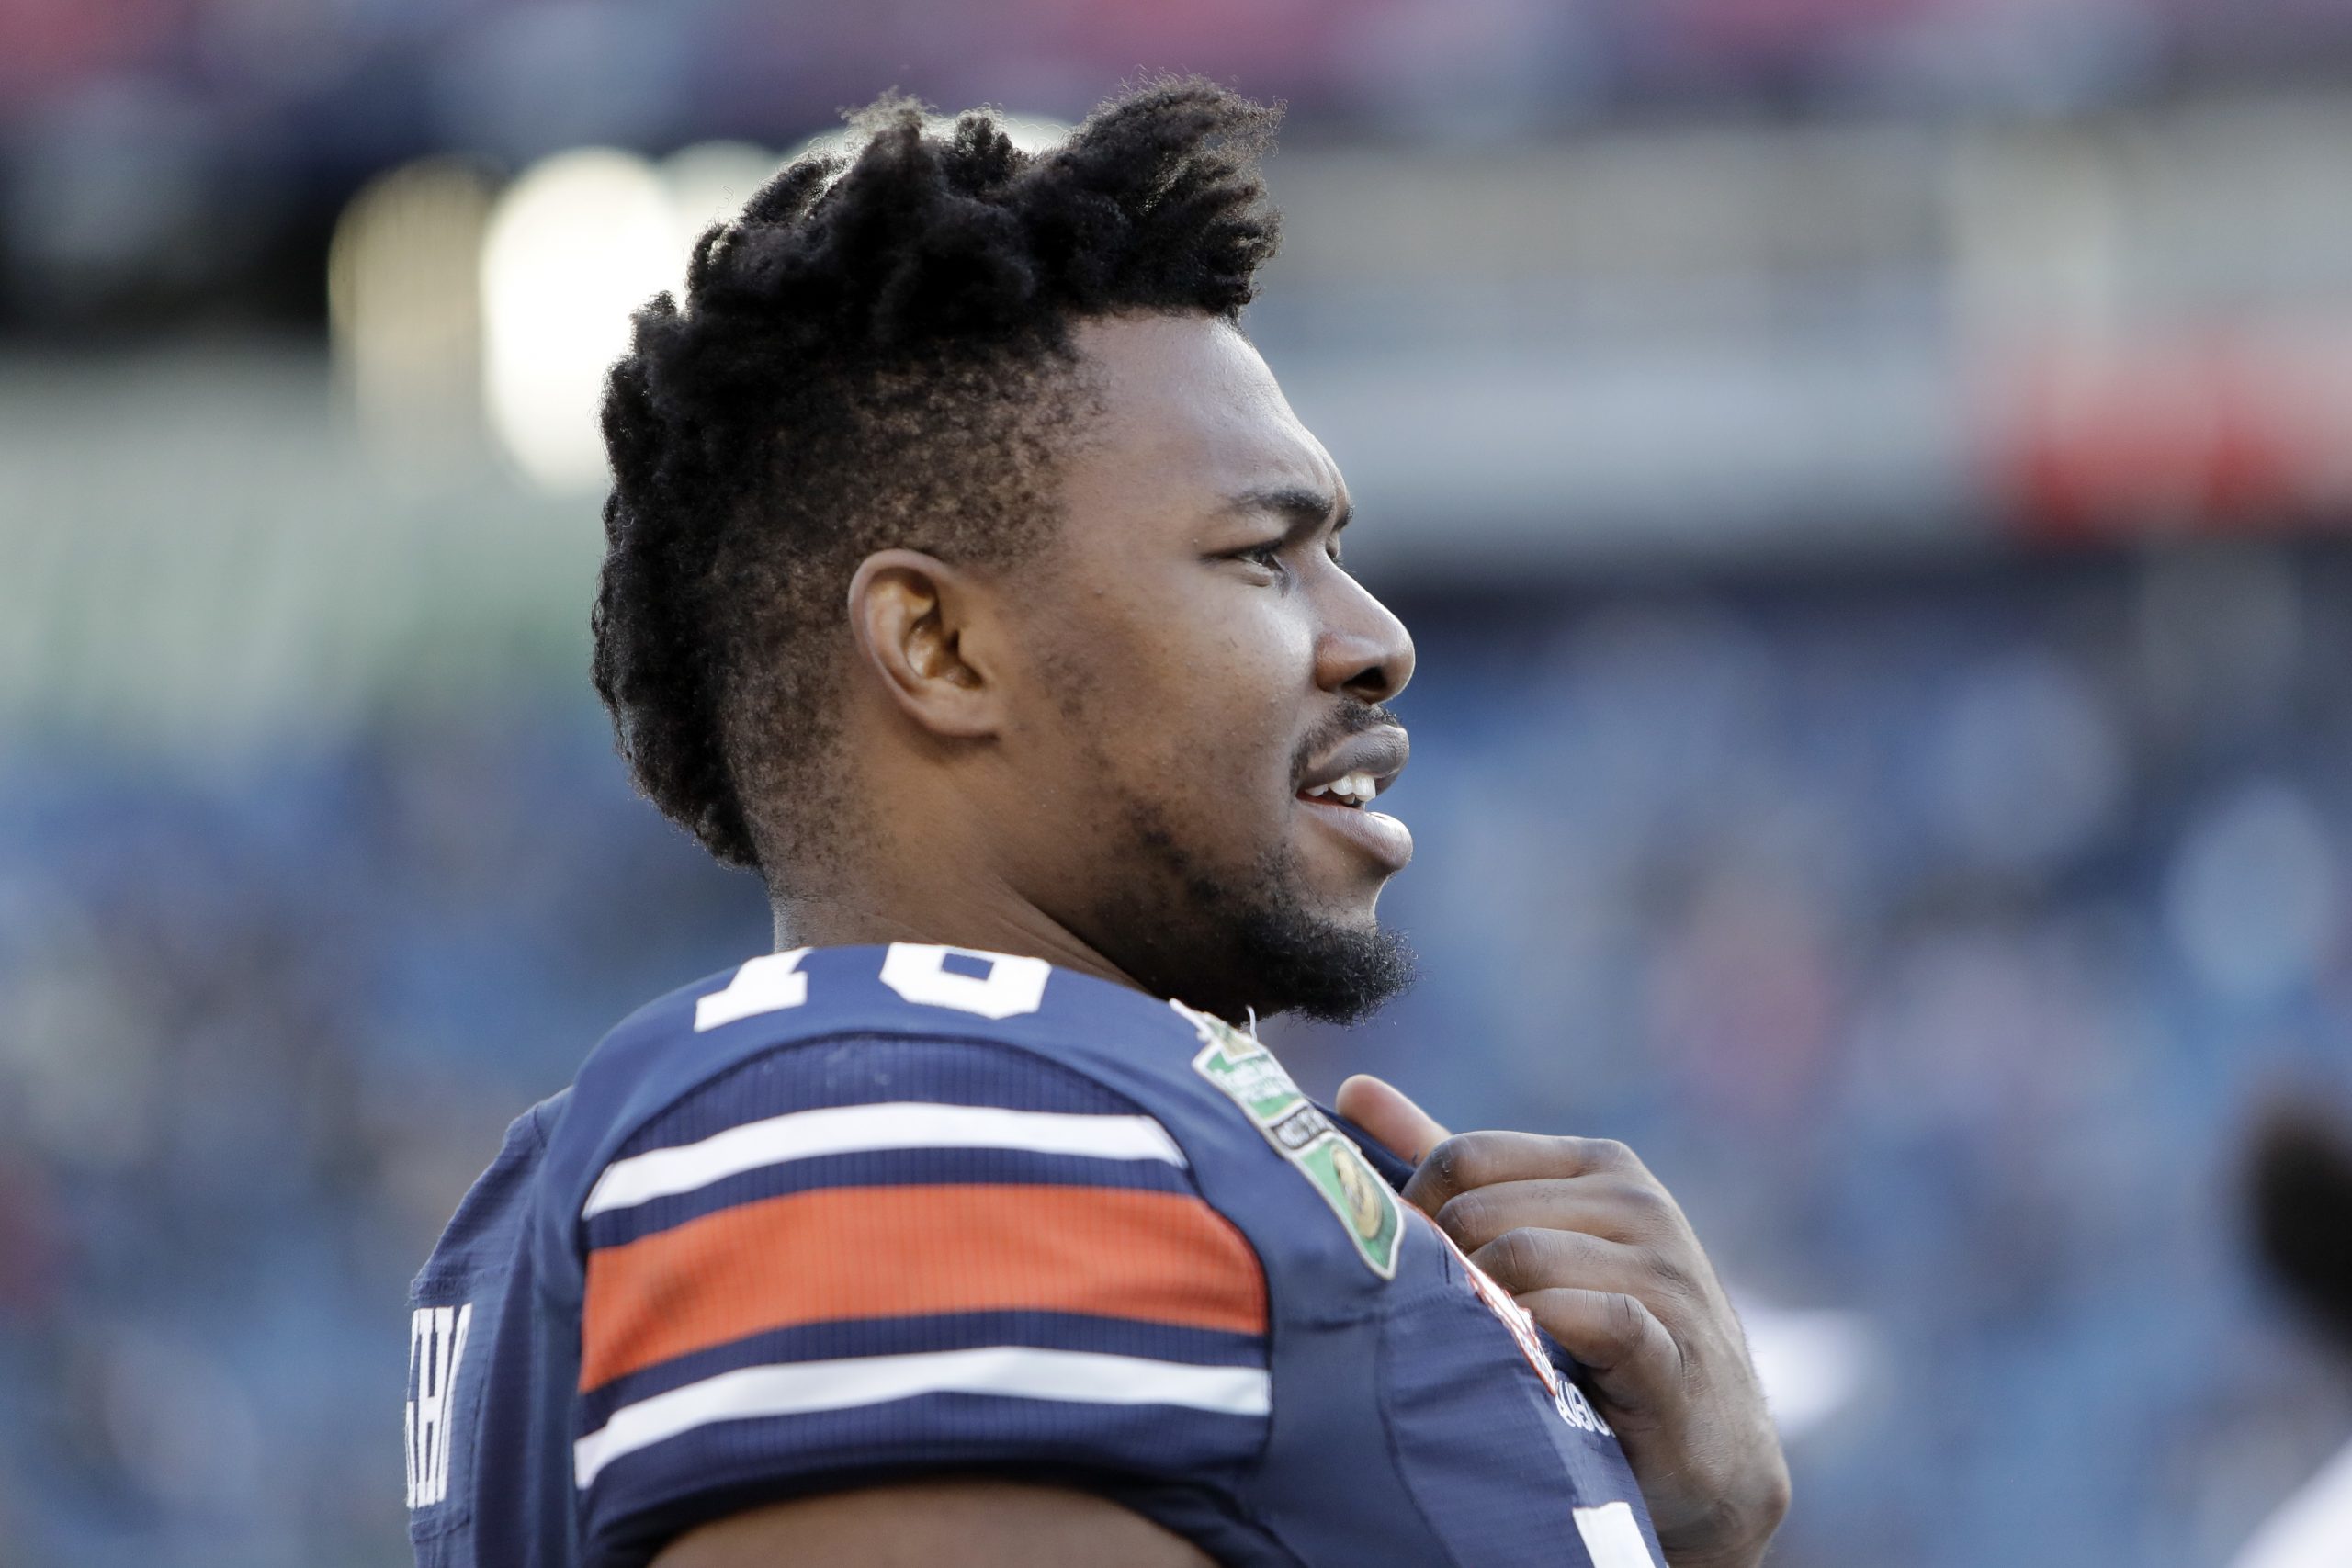 Auburn offensive lineman Prince Tega Wanogho watches from the sideline in the second half of the Music City Bowl NCAA college football game against Purdue Friday, Dec. 28, 2018, in Nashville, Tenn. Auburn won 63-14. (AP Photo/Mark Humphrey)